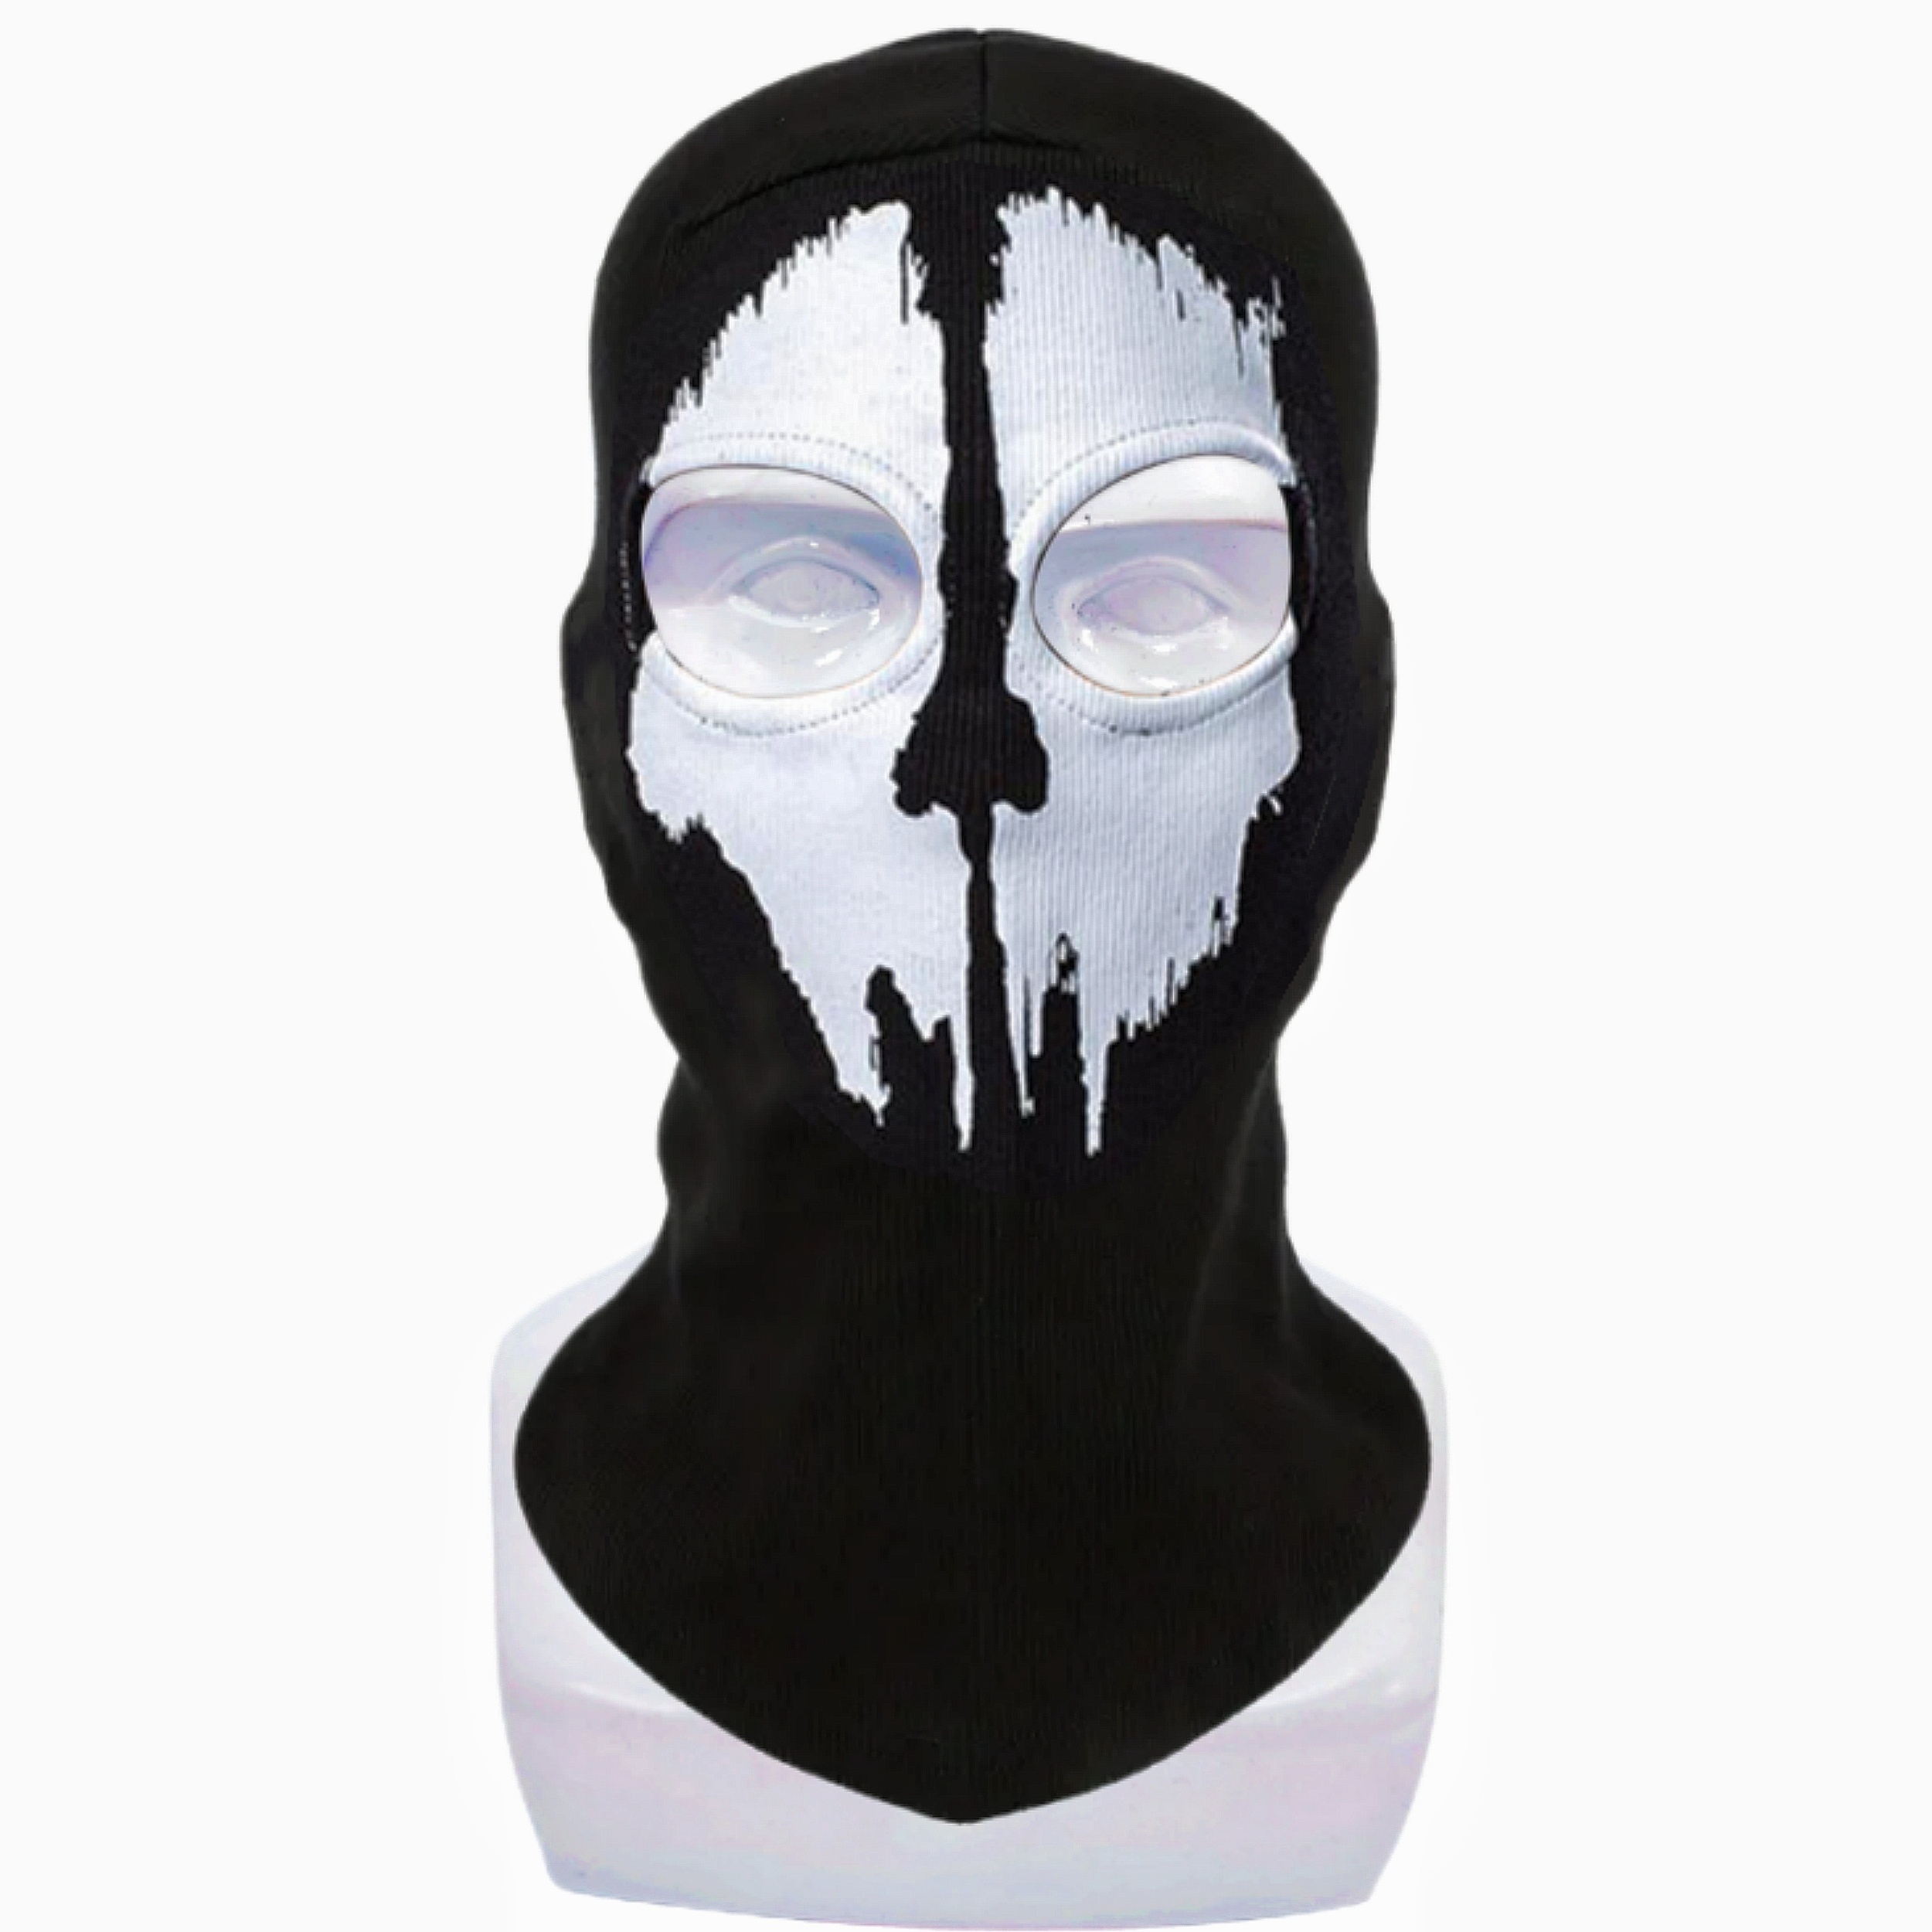 Call Of Duty Ghost Mask For Adult Balaclava Hat + Skull Face Mask Cosplay  Costume Masks For War Game Outdoor Sport, Halloween Party